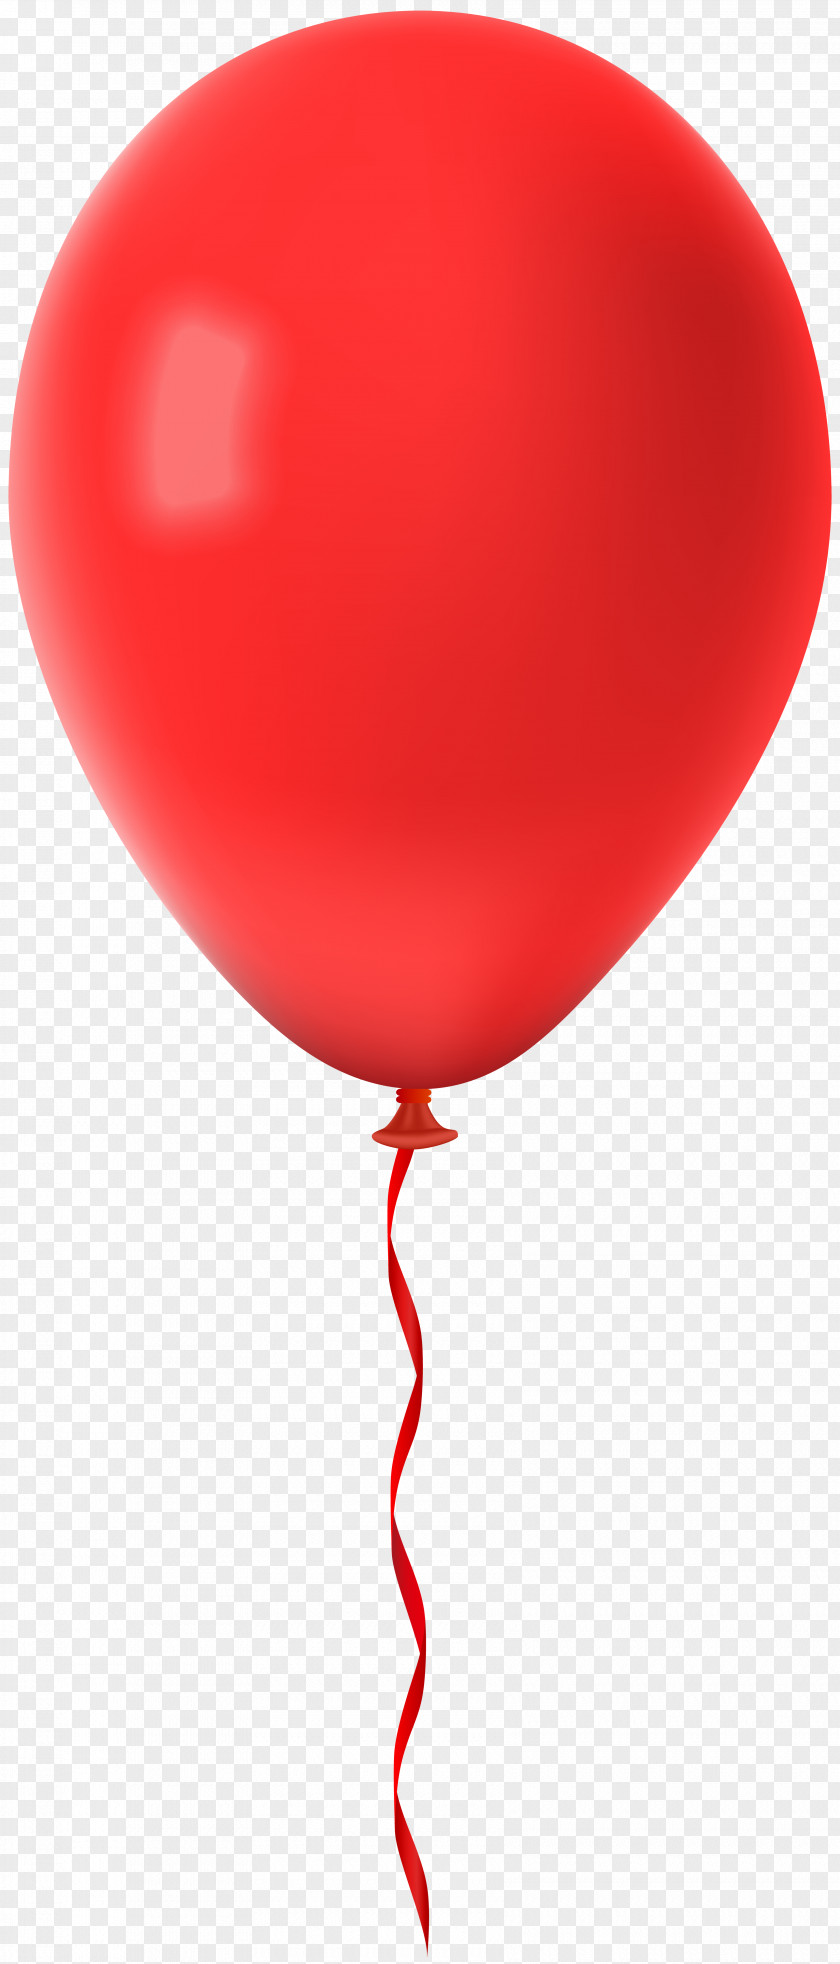 Red Balloon Dog Clip Art Image Openclipart PNG